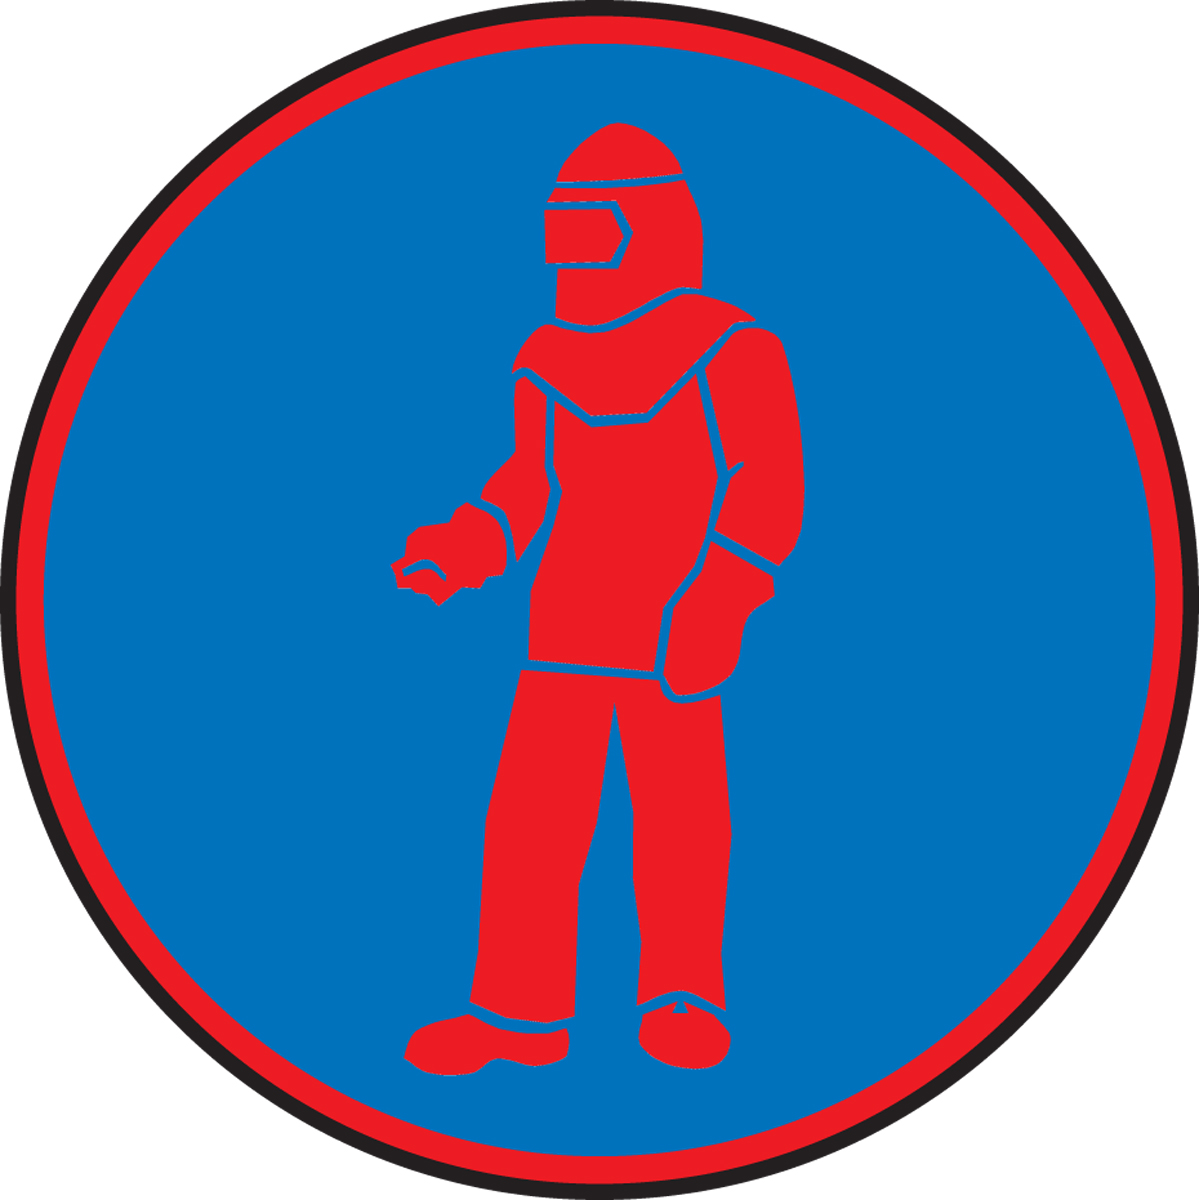 WEAR FULL PROTECTIVE CLOTHING (RED/BLUE)